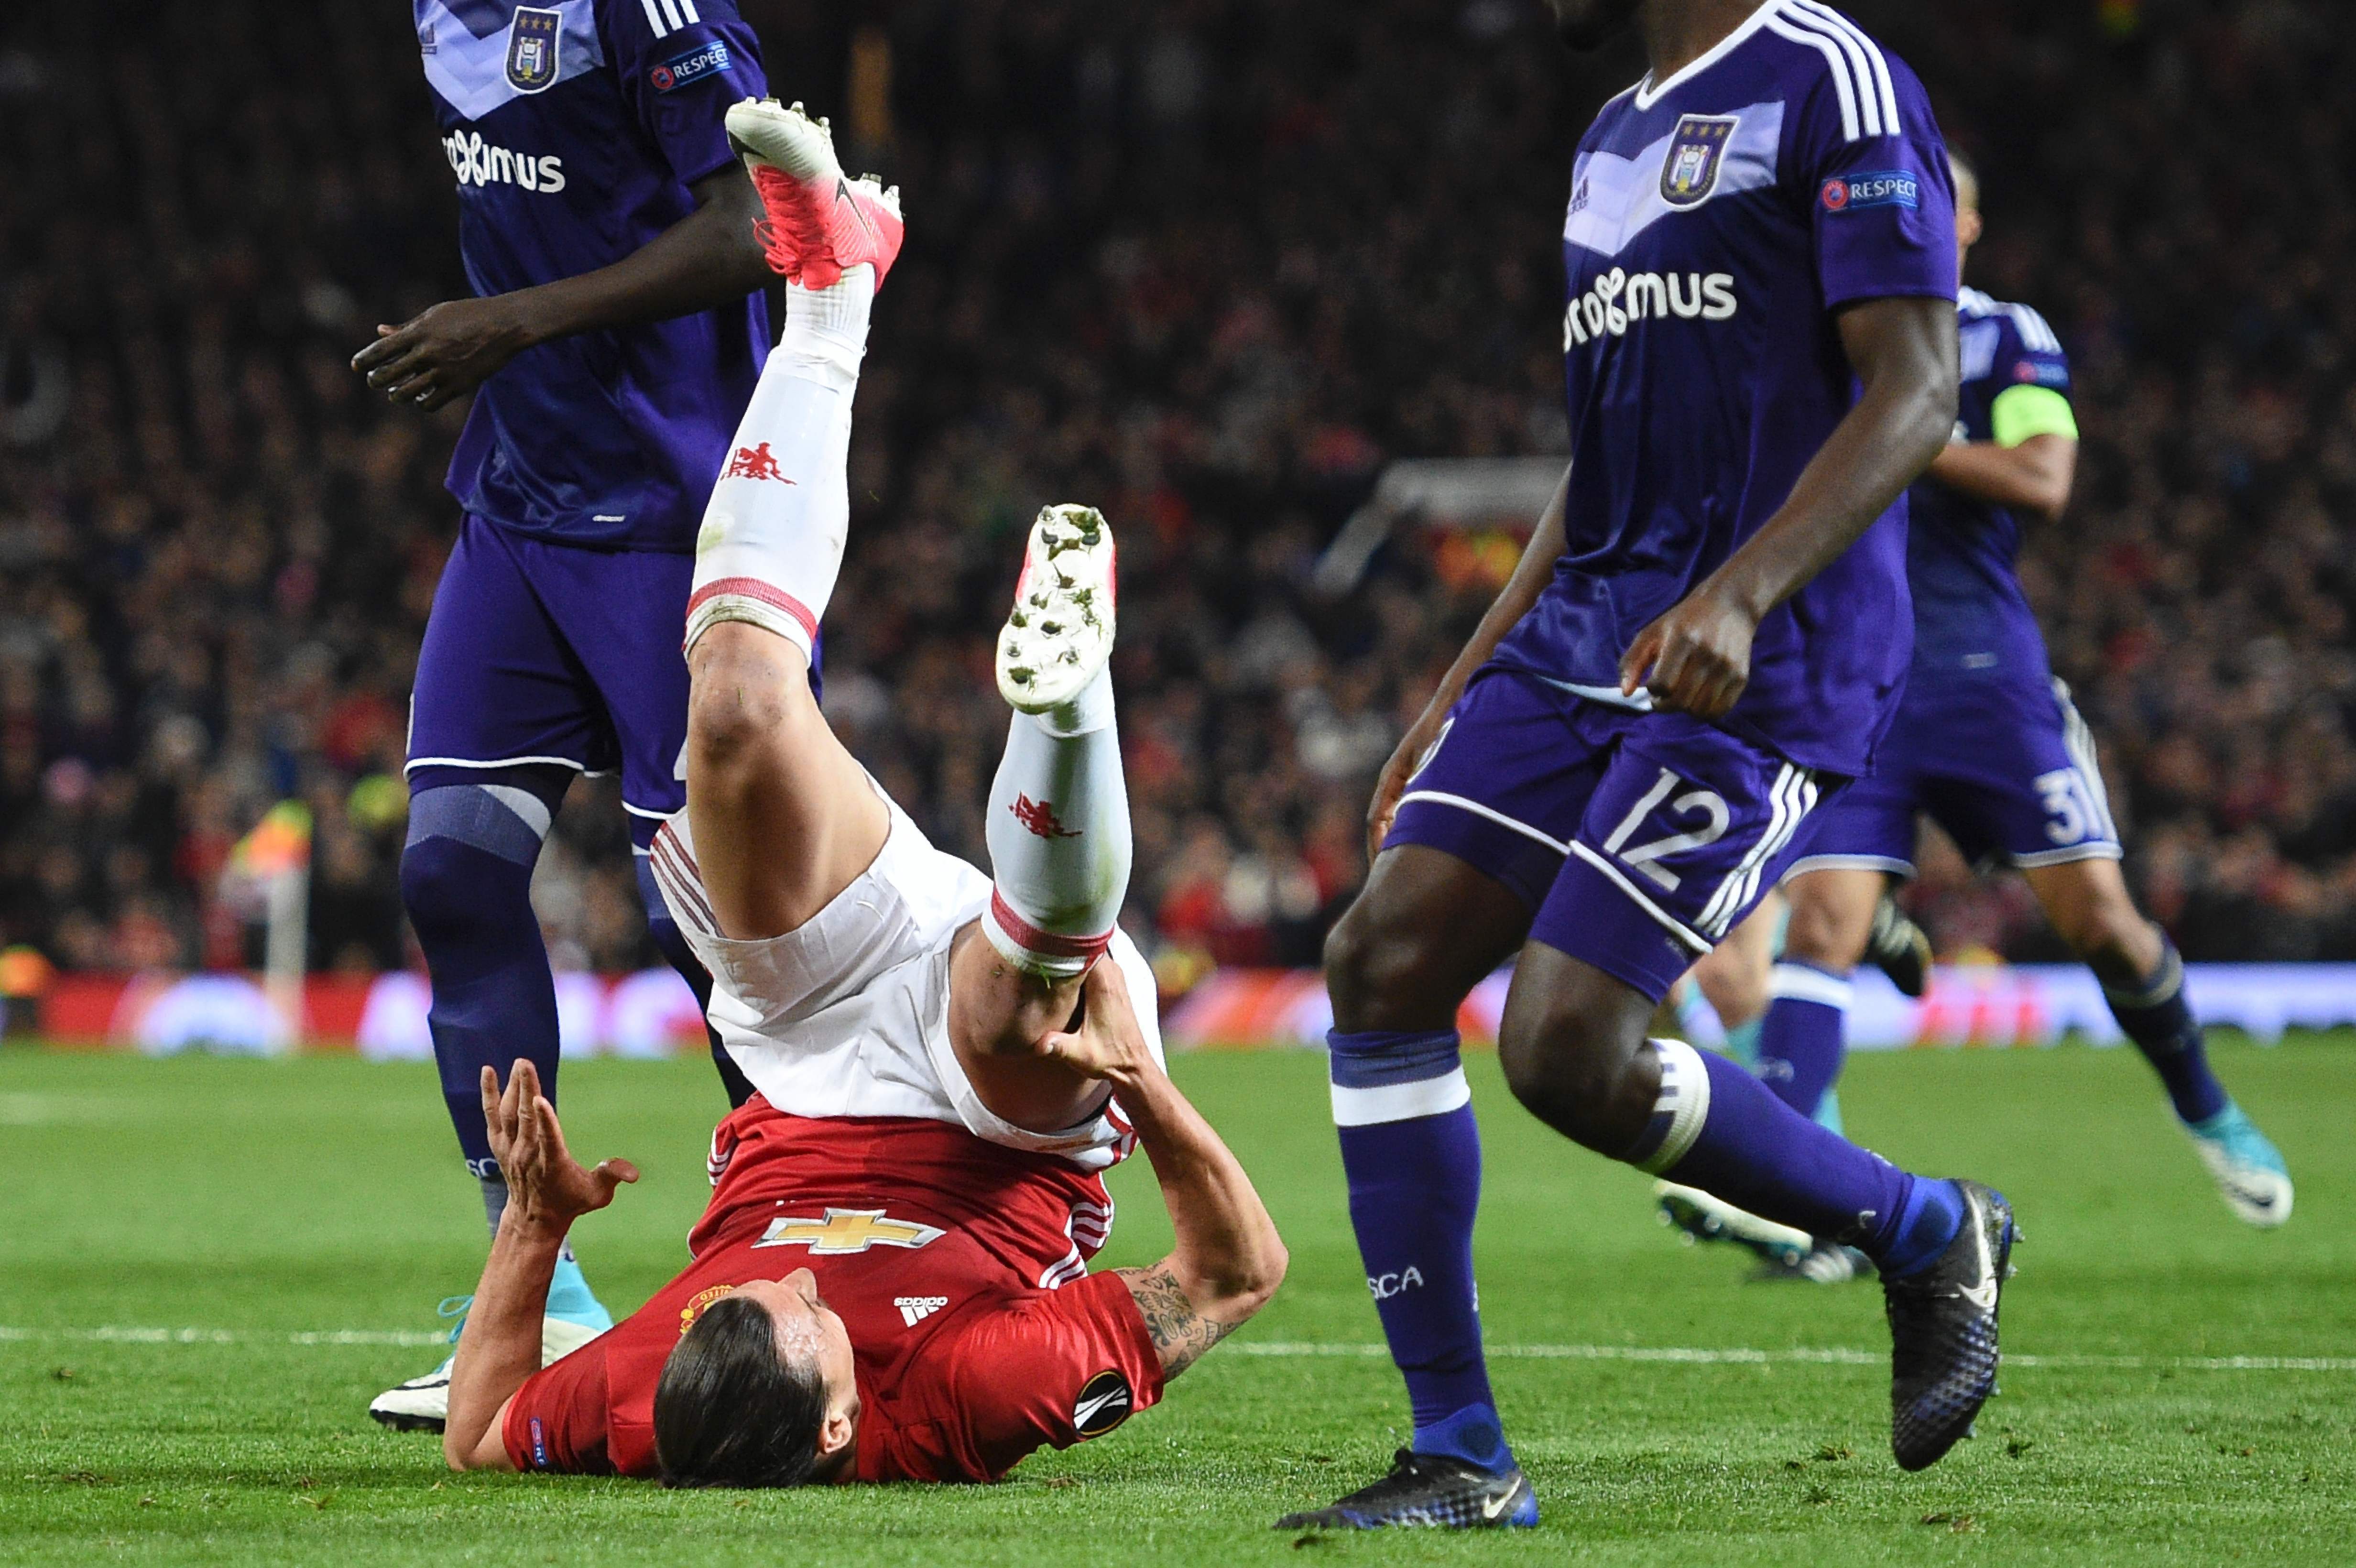 TOPSHOT - Manchester United's Swedish striker Zlatan Ibrahimovic goes down holding his knee during the UEFA Europa League quarter-final second leg football match between Manchester United and Anderlecht at Old Trafford in Manchester, north west England, on April 20, 2017. / AFP PHOTO / Oli SCARFF / TT / kod 444